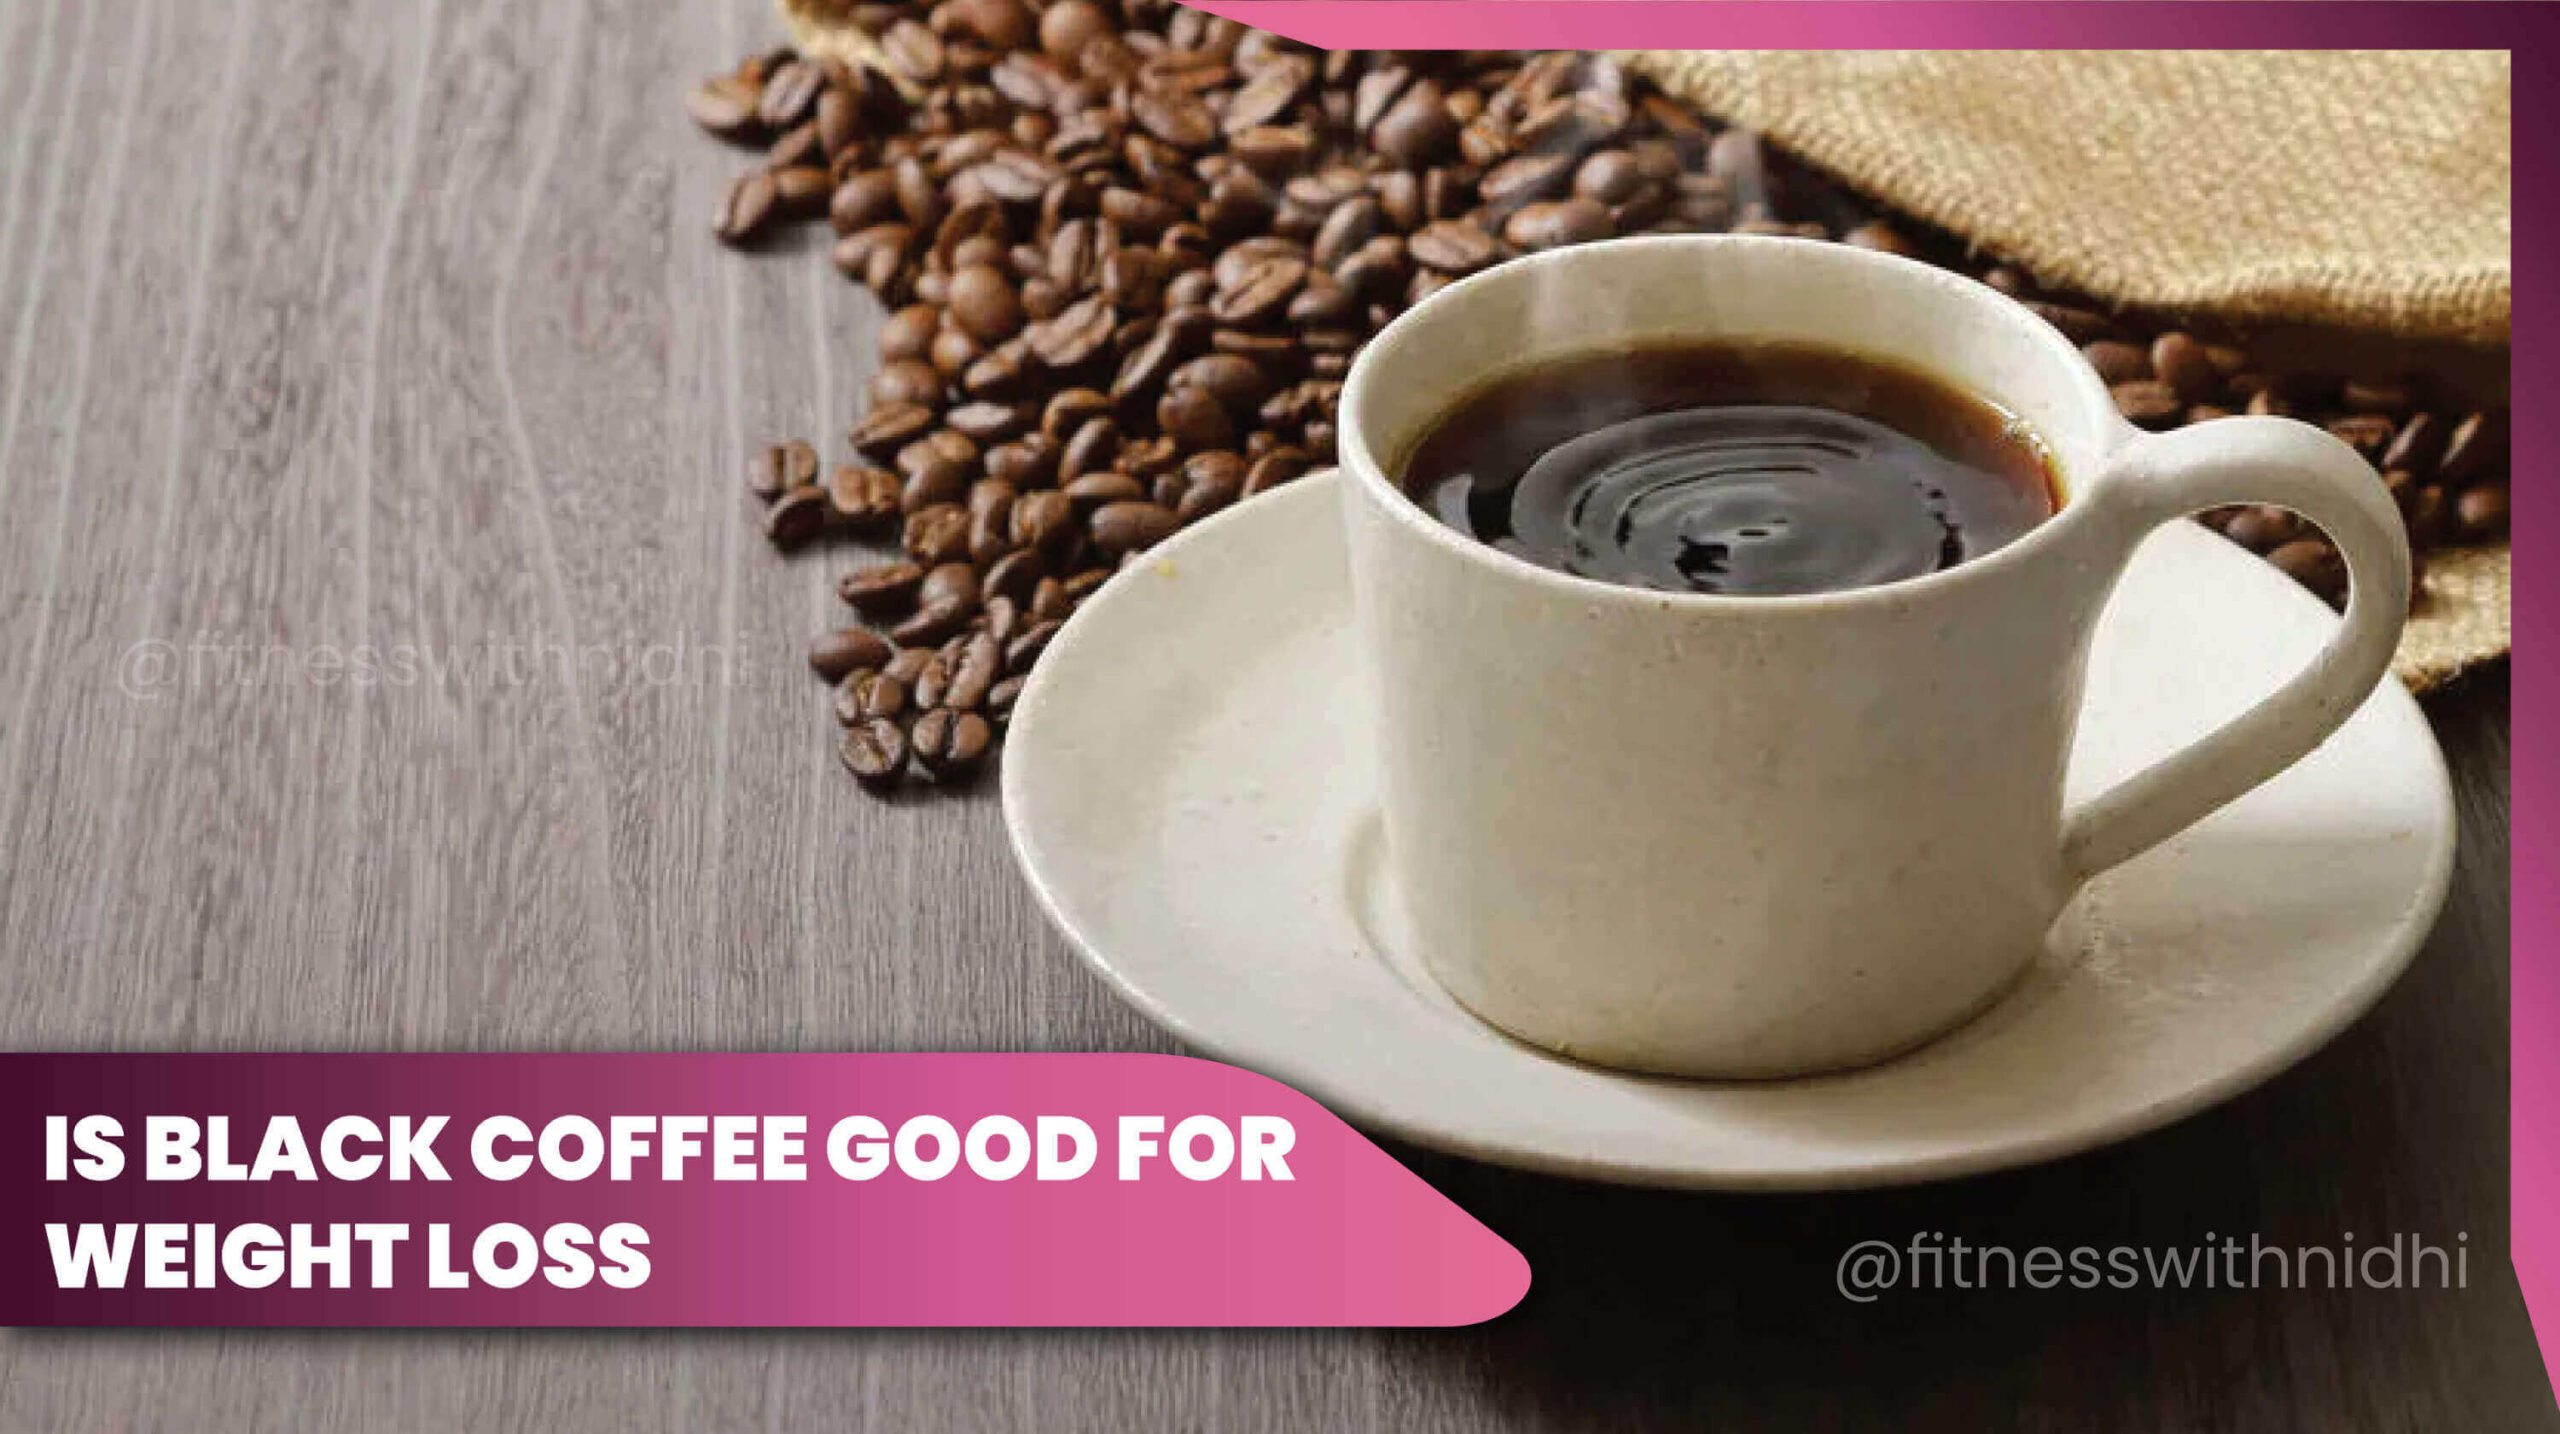 11benefits of black coffee for weight loss